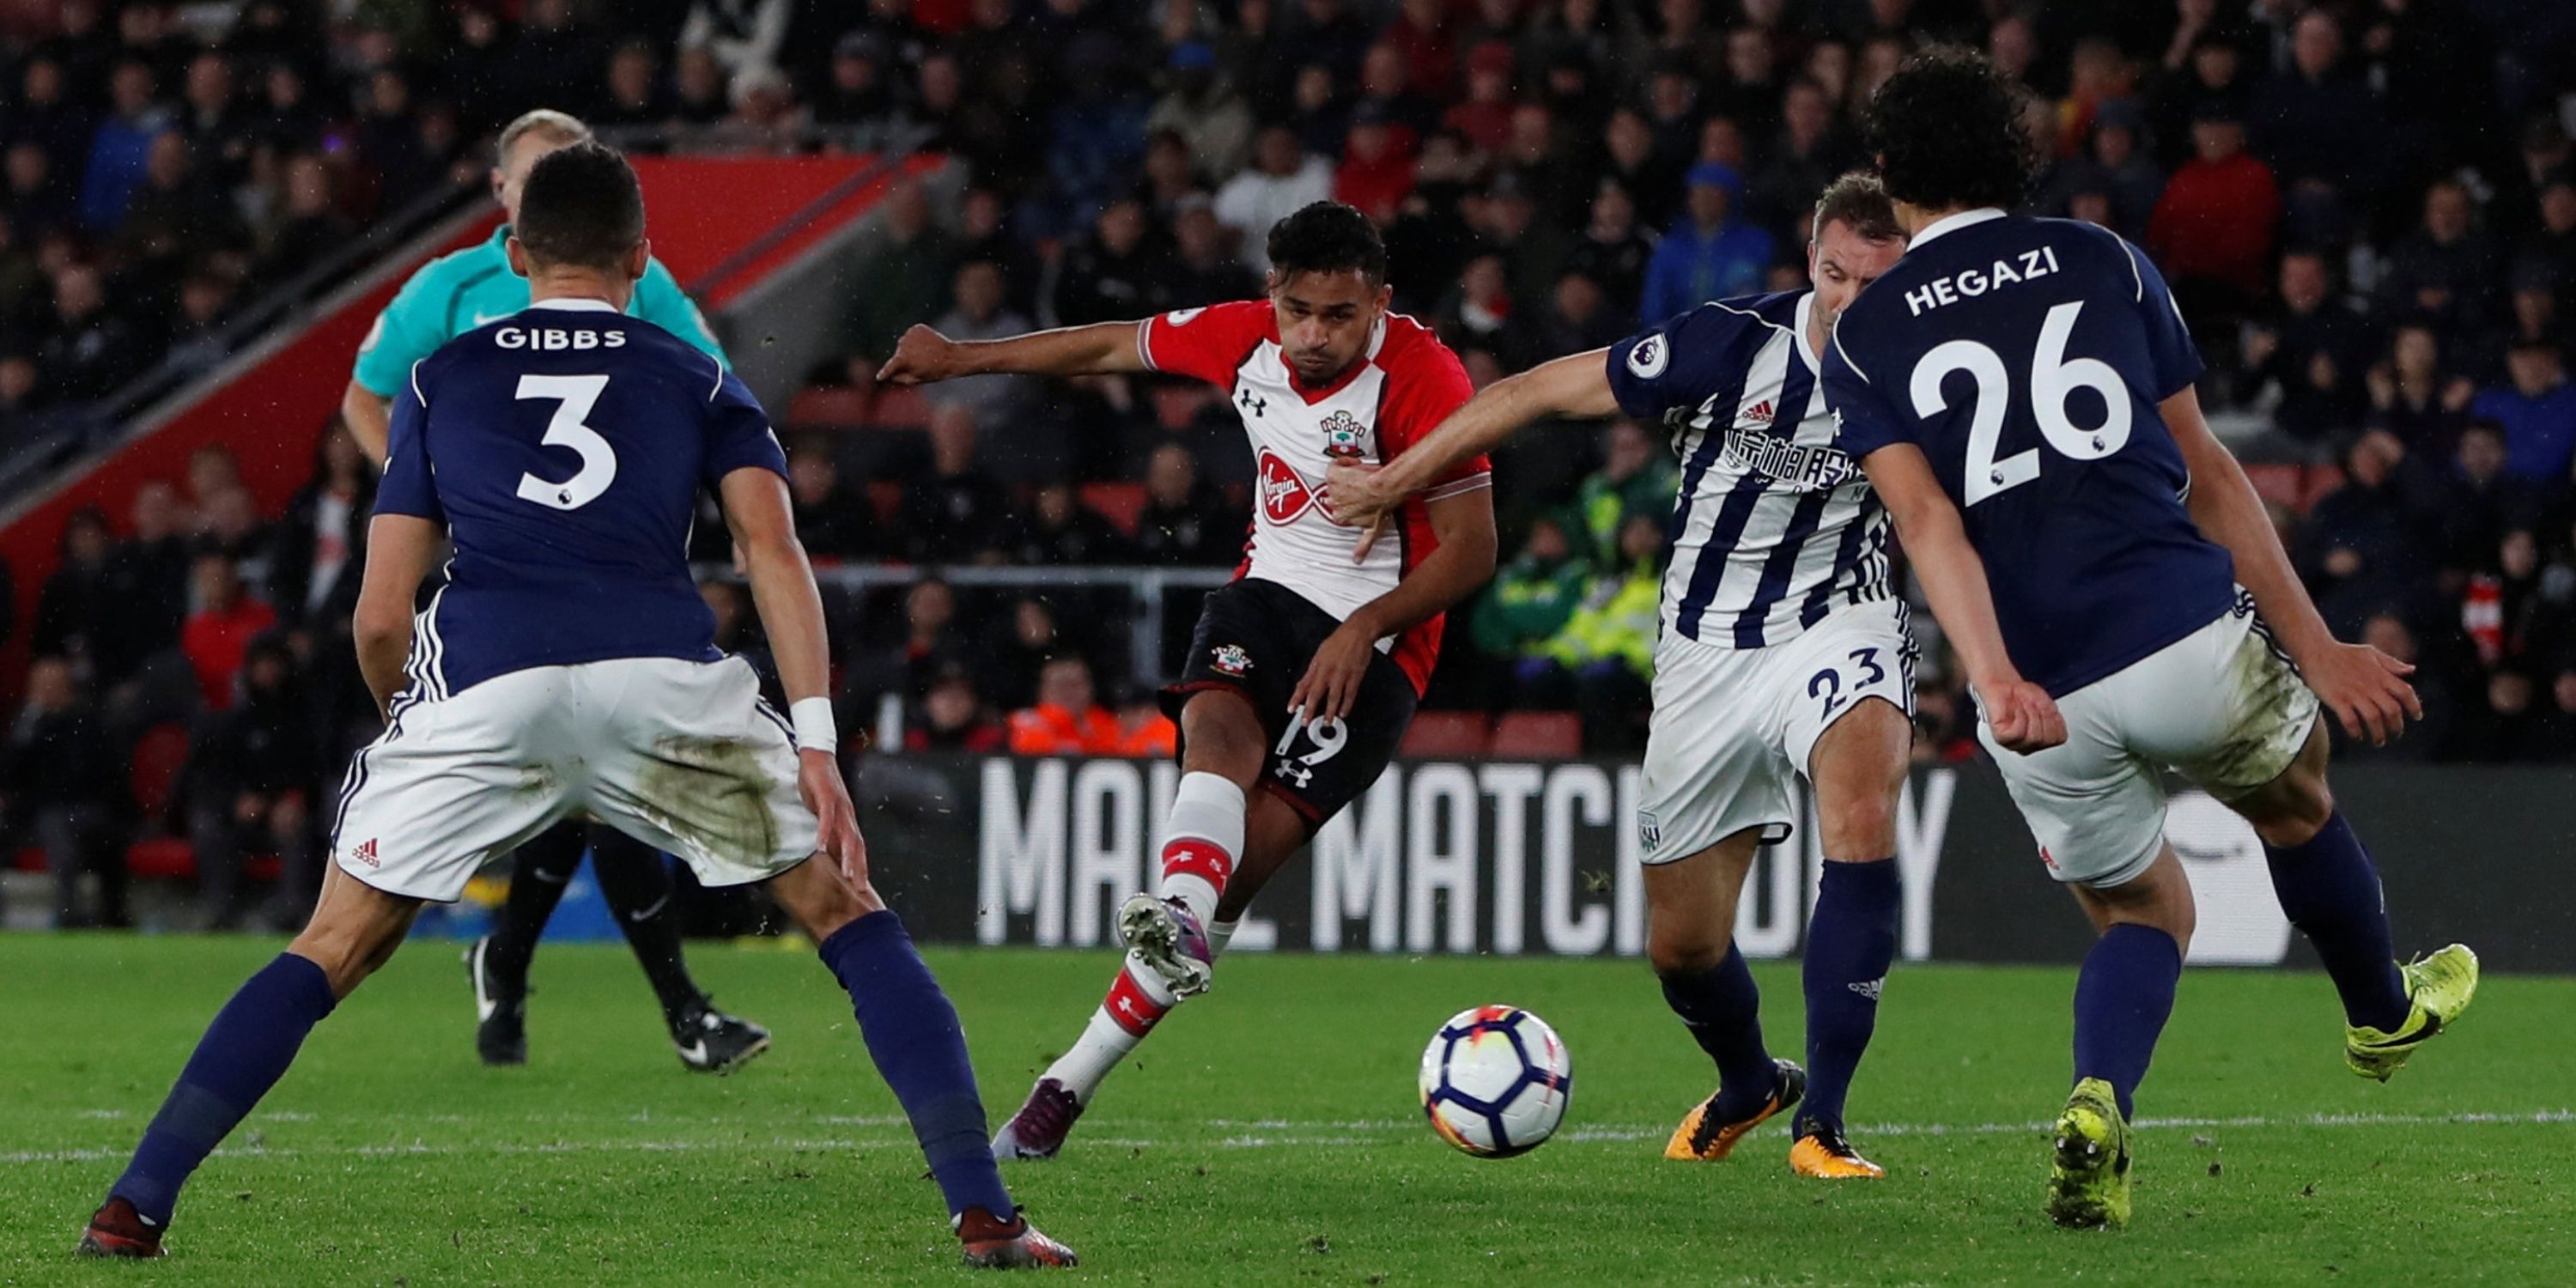 Southampton's Sofiane Boufal gets the shot away through a forest of West Brom players.